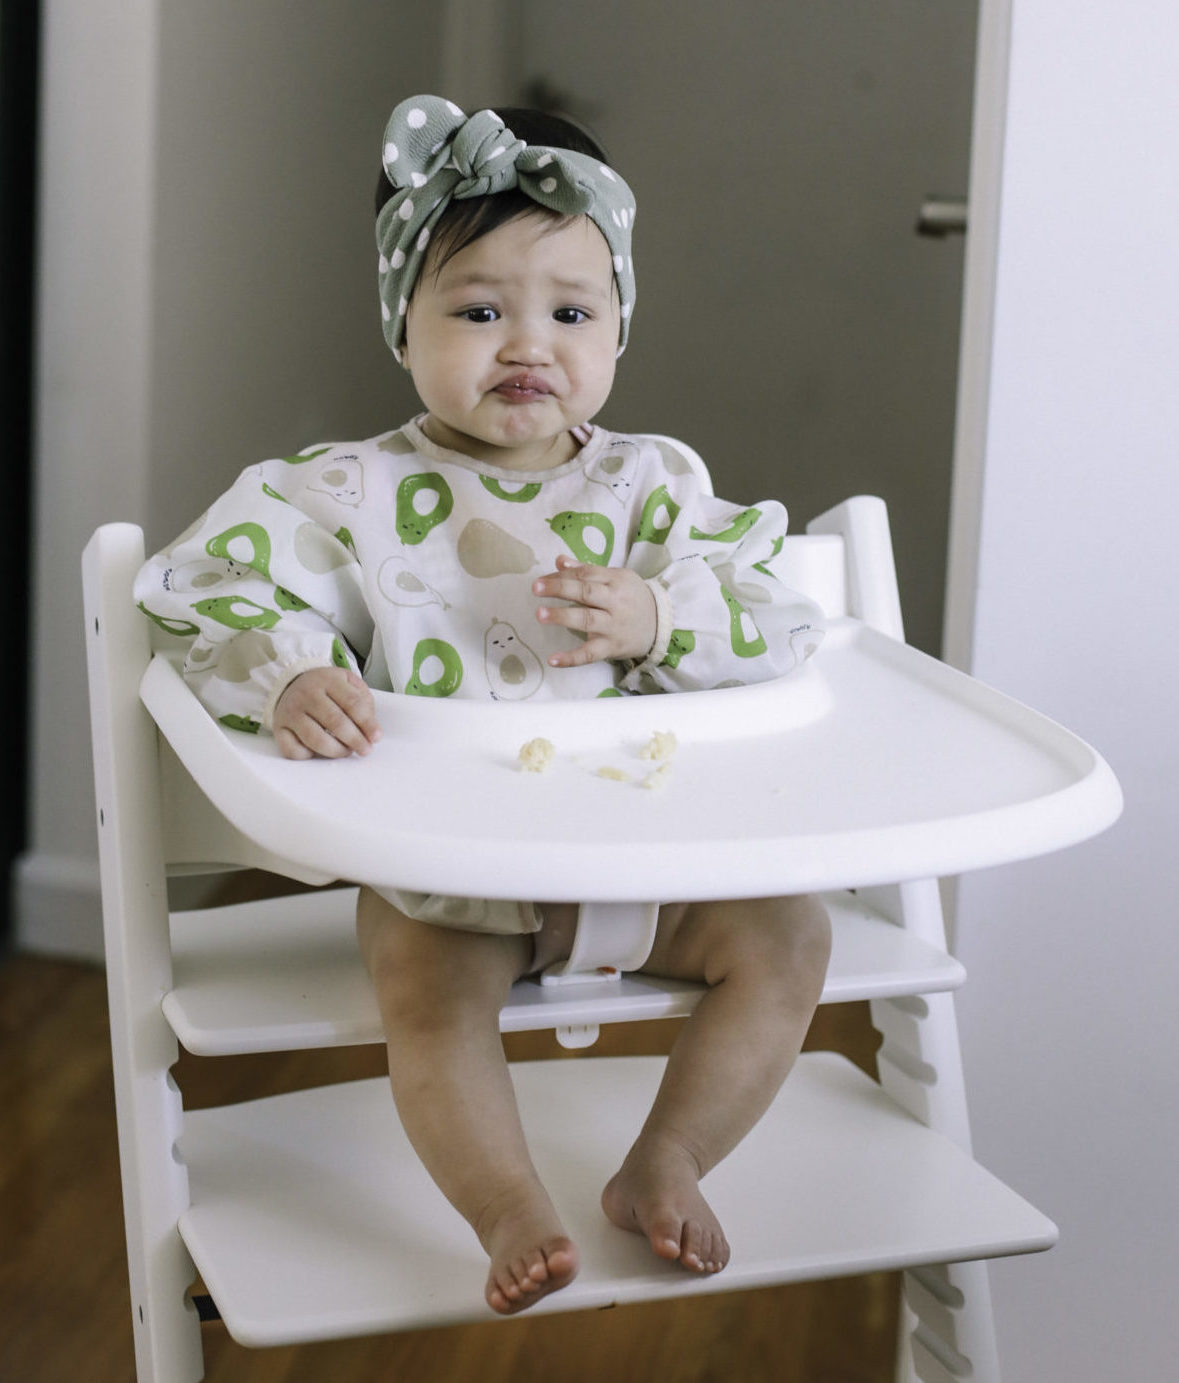 strokke trip trapp high chair review 6 months old